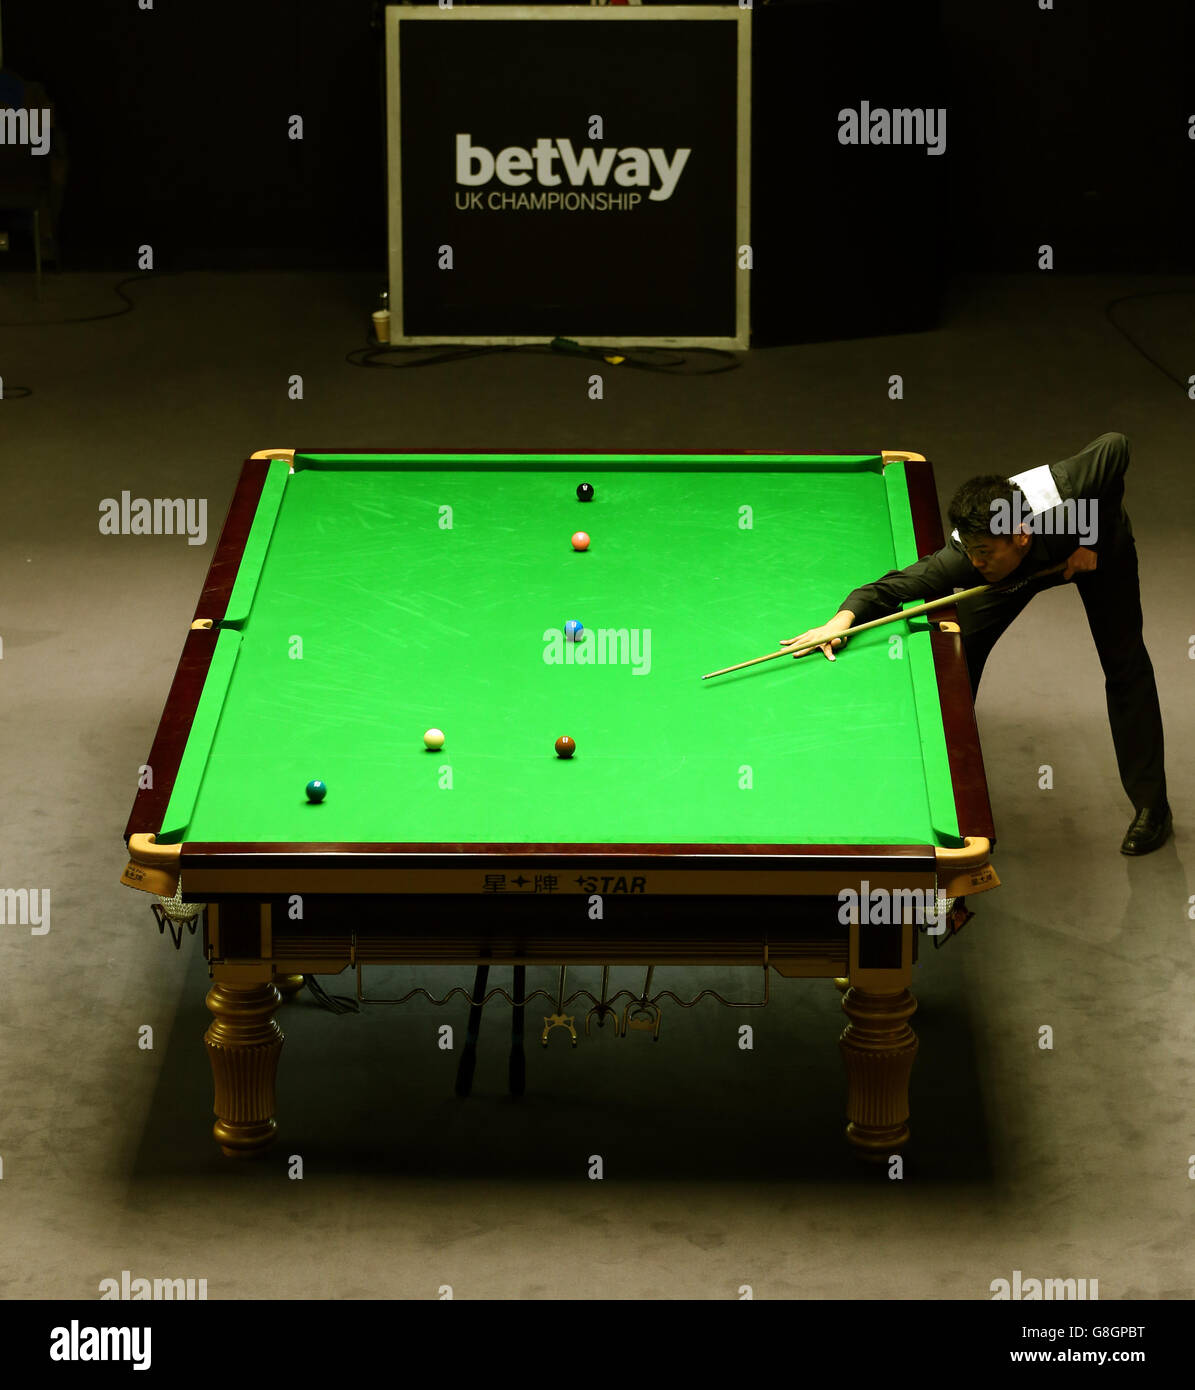 Liang Wenbo in action against Tom Ford during day nine of the 2015 Betway UK Snooker Championship at The York Barbican, York. PRESS ASSOCIATION Photo. Picture date: Thursday December 3, 2015. See PA story SNOOKER York. Photo credit should read: Simon Cooper/PA Wire Stock Photo